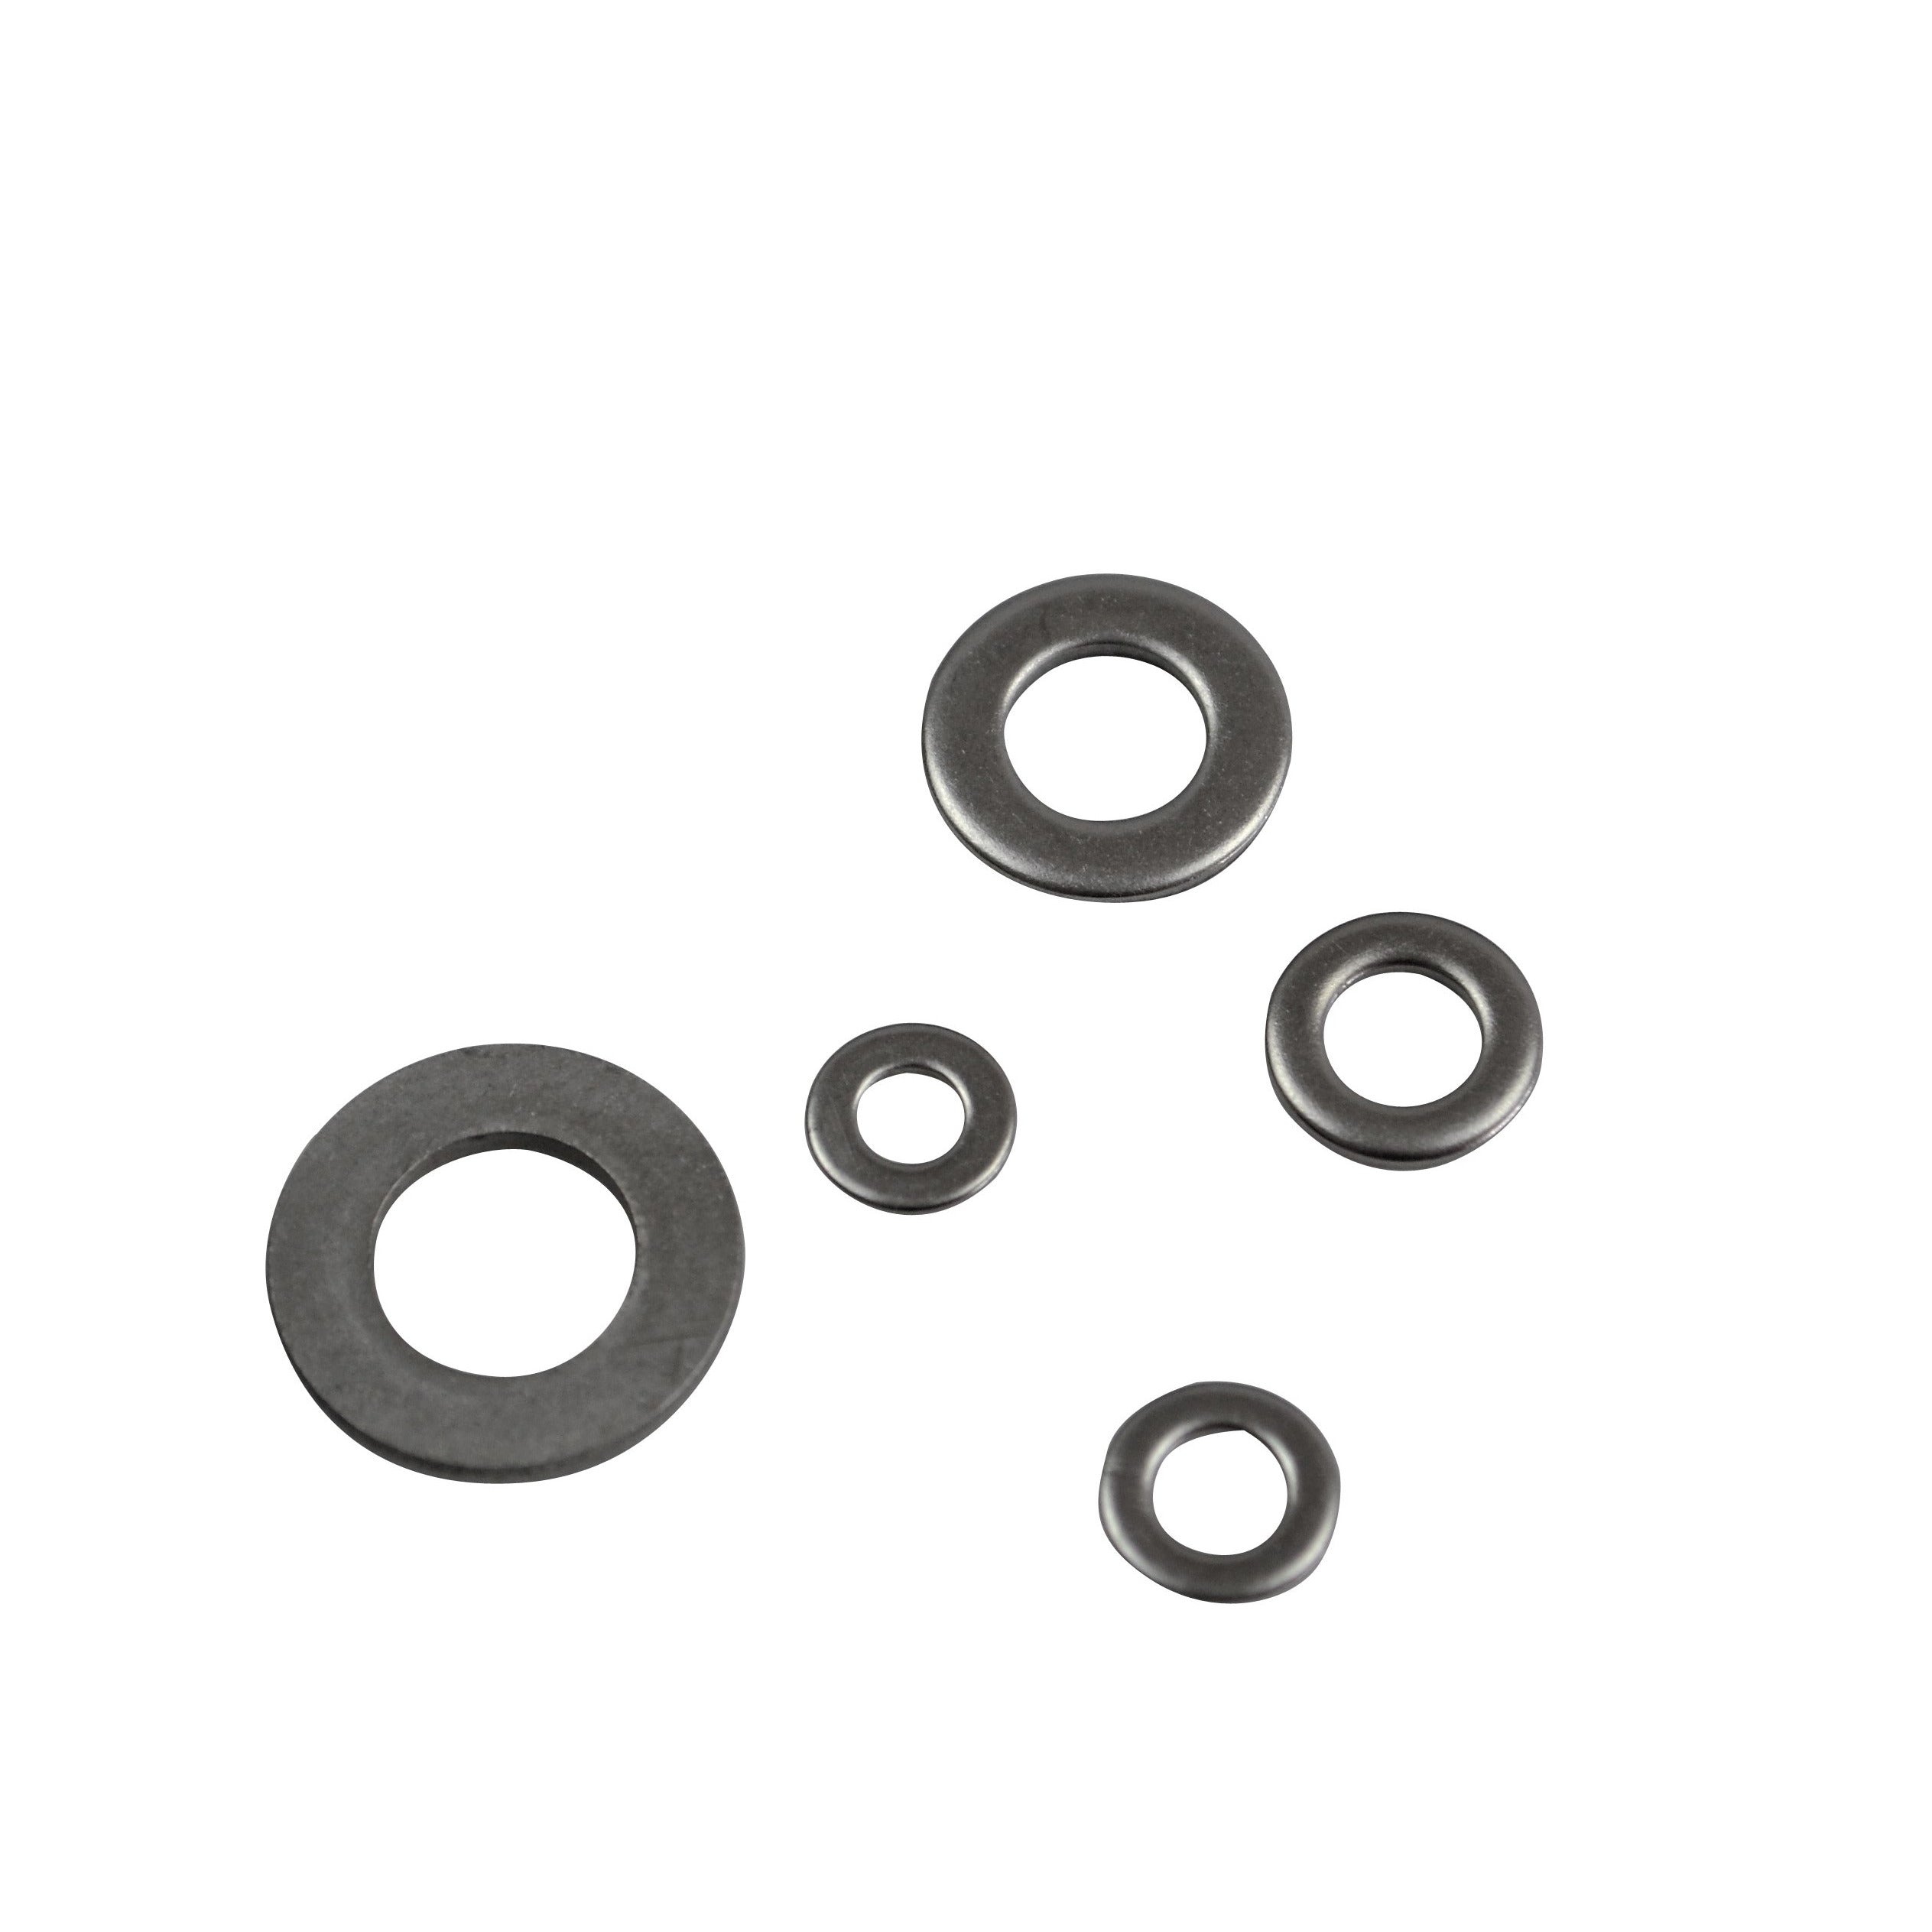 flat washer split washer teeth washer stainless steal 460pc kit 5 sizes M4 M10 fastners assortment set